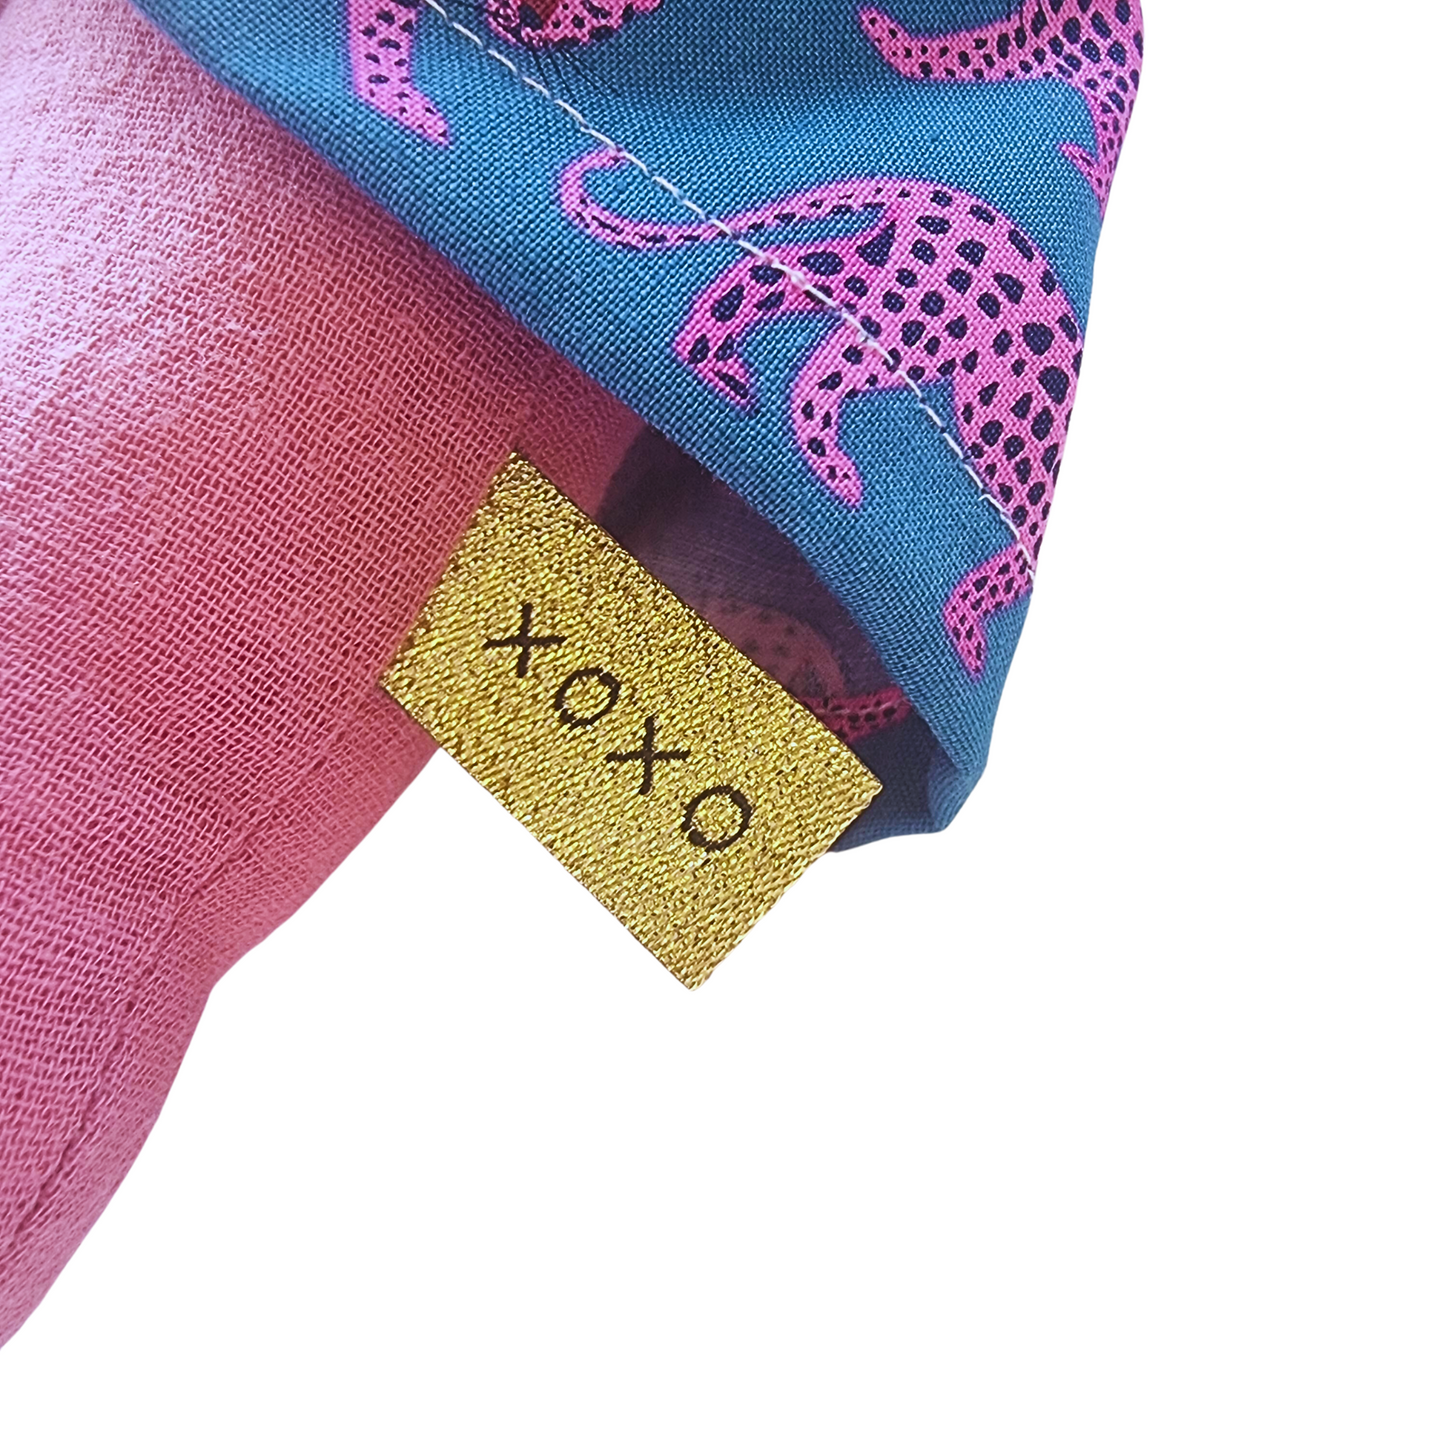 XOXO Gold | Woven Sew In Labels